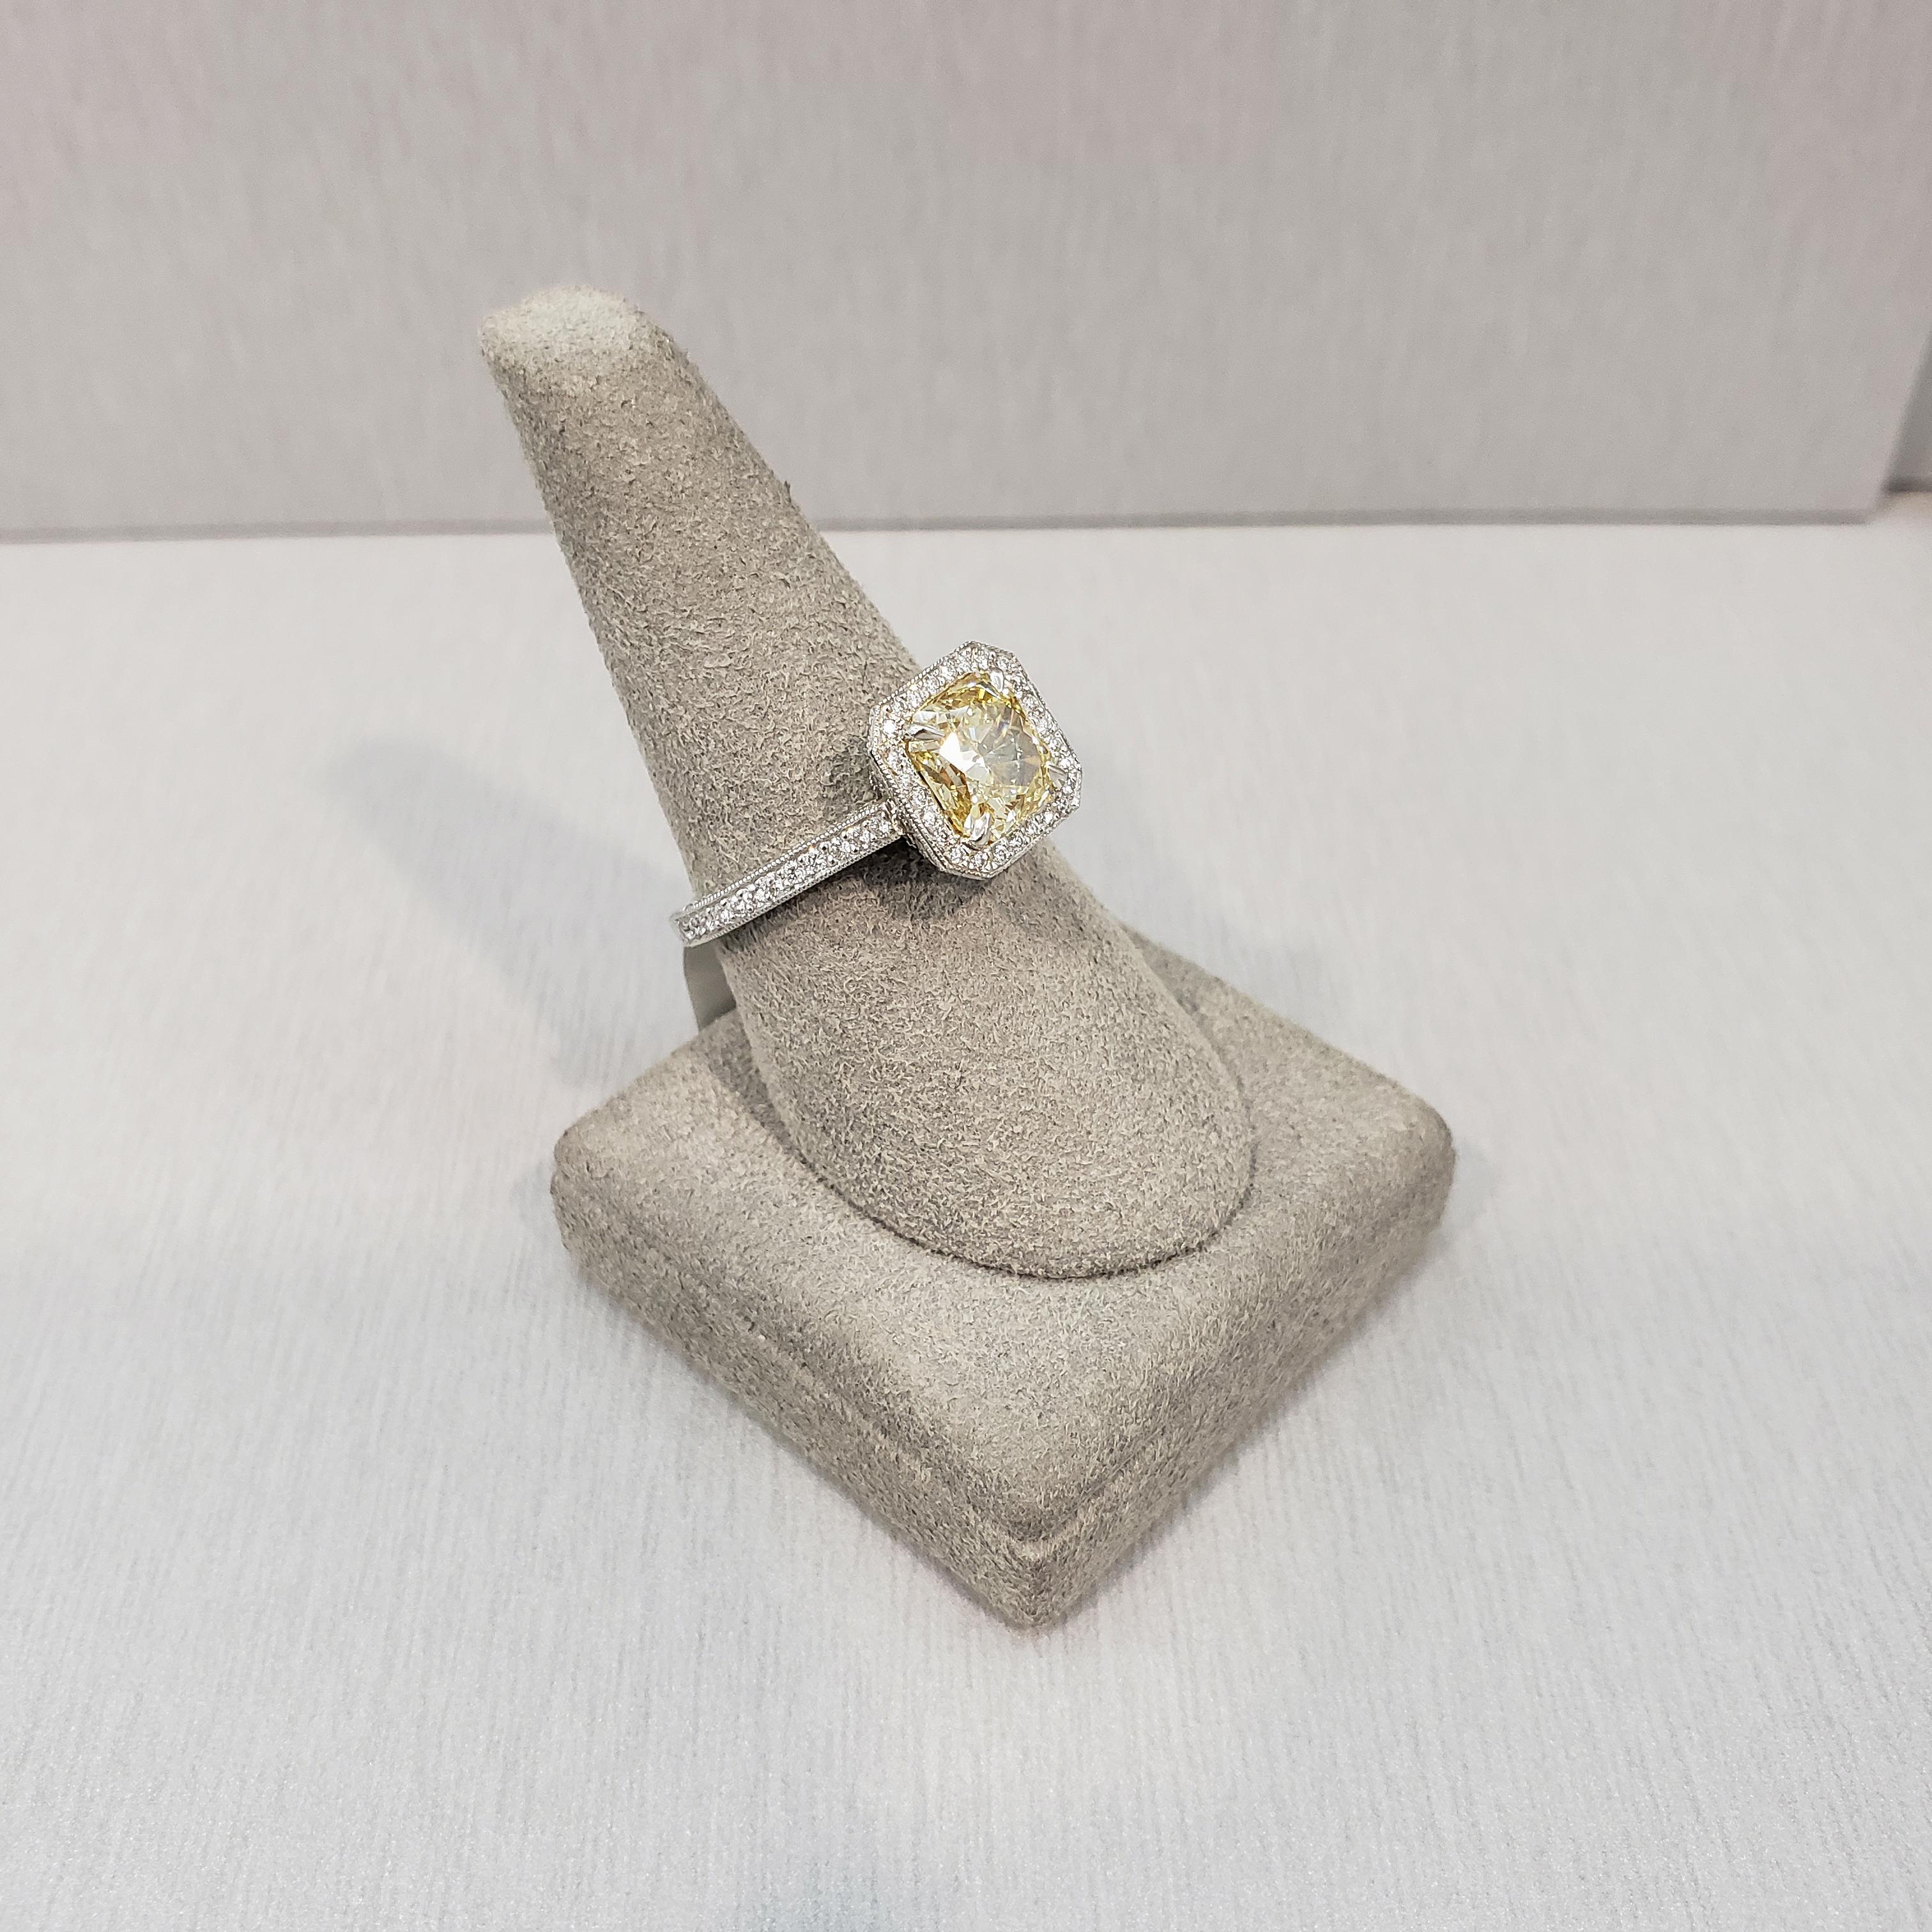 Radiant Cut GIA Certified 1.76 Carats Yellow Diamond Vintage Style Halo Engagement Ring For Sale